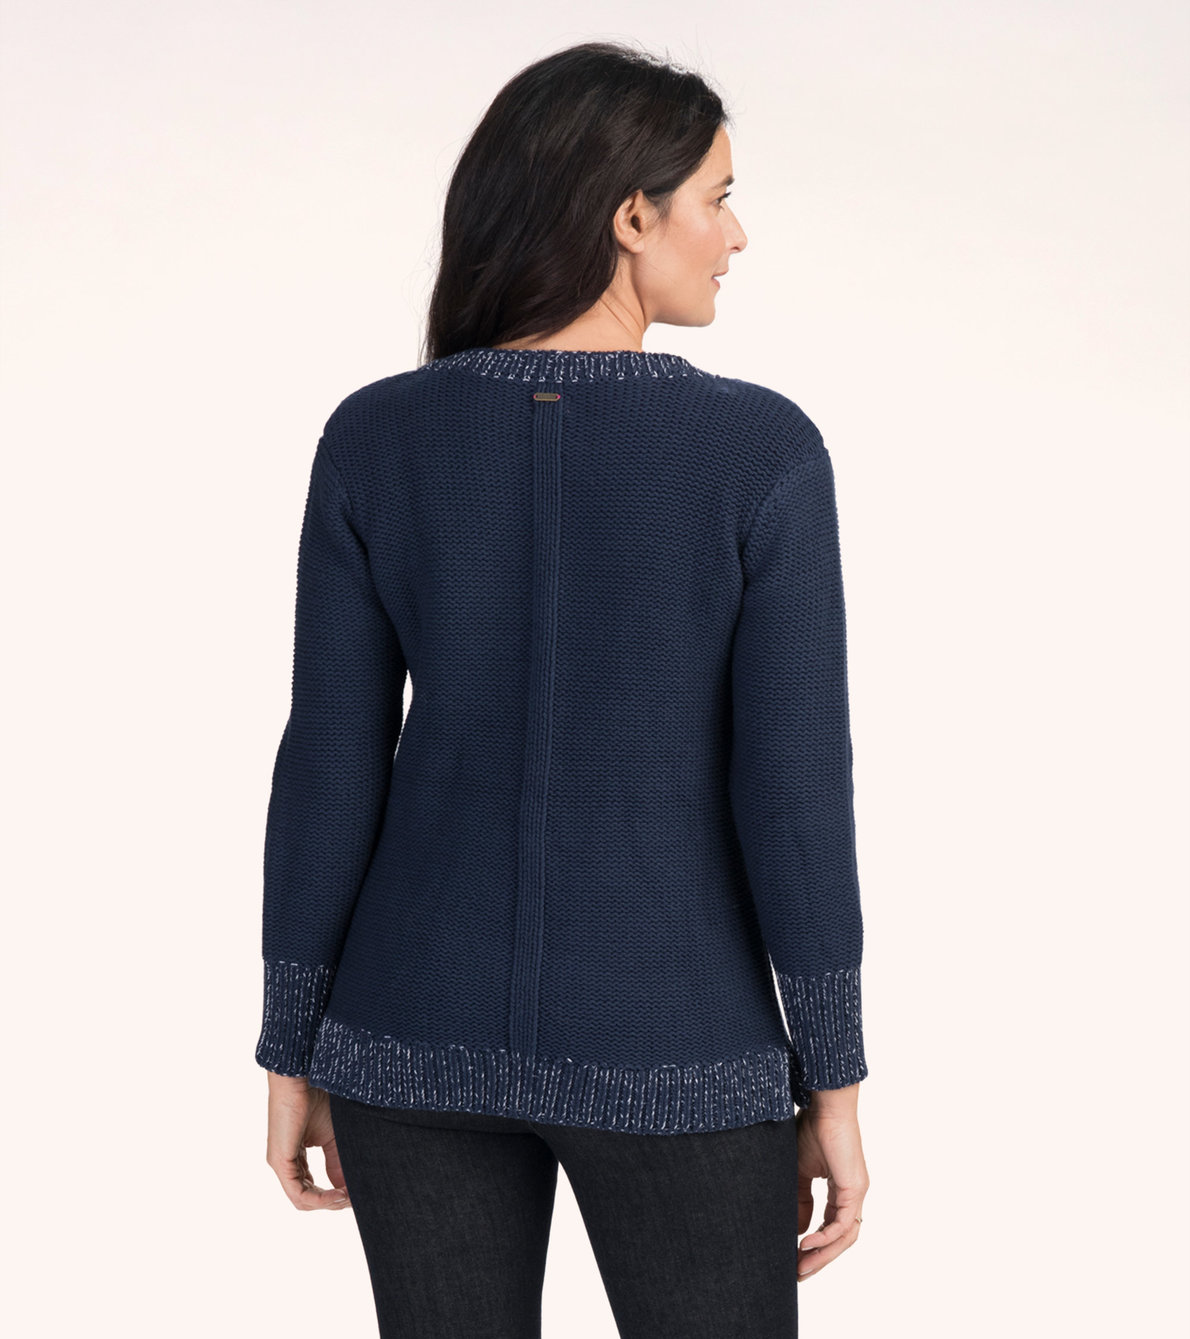 View larger image of Navy Cable Knit Sweater